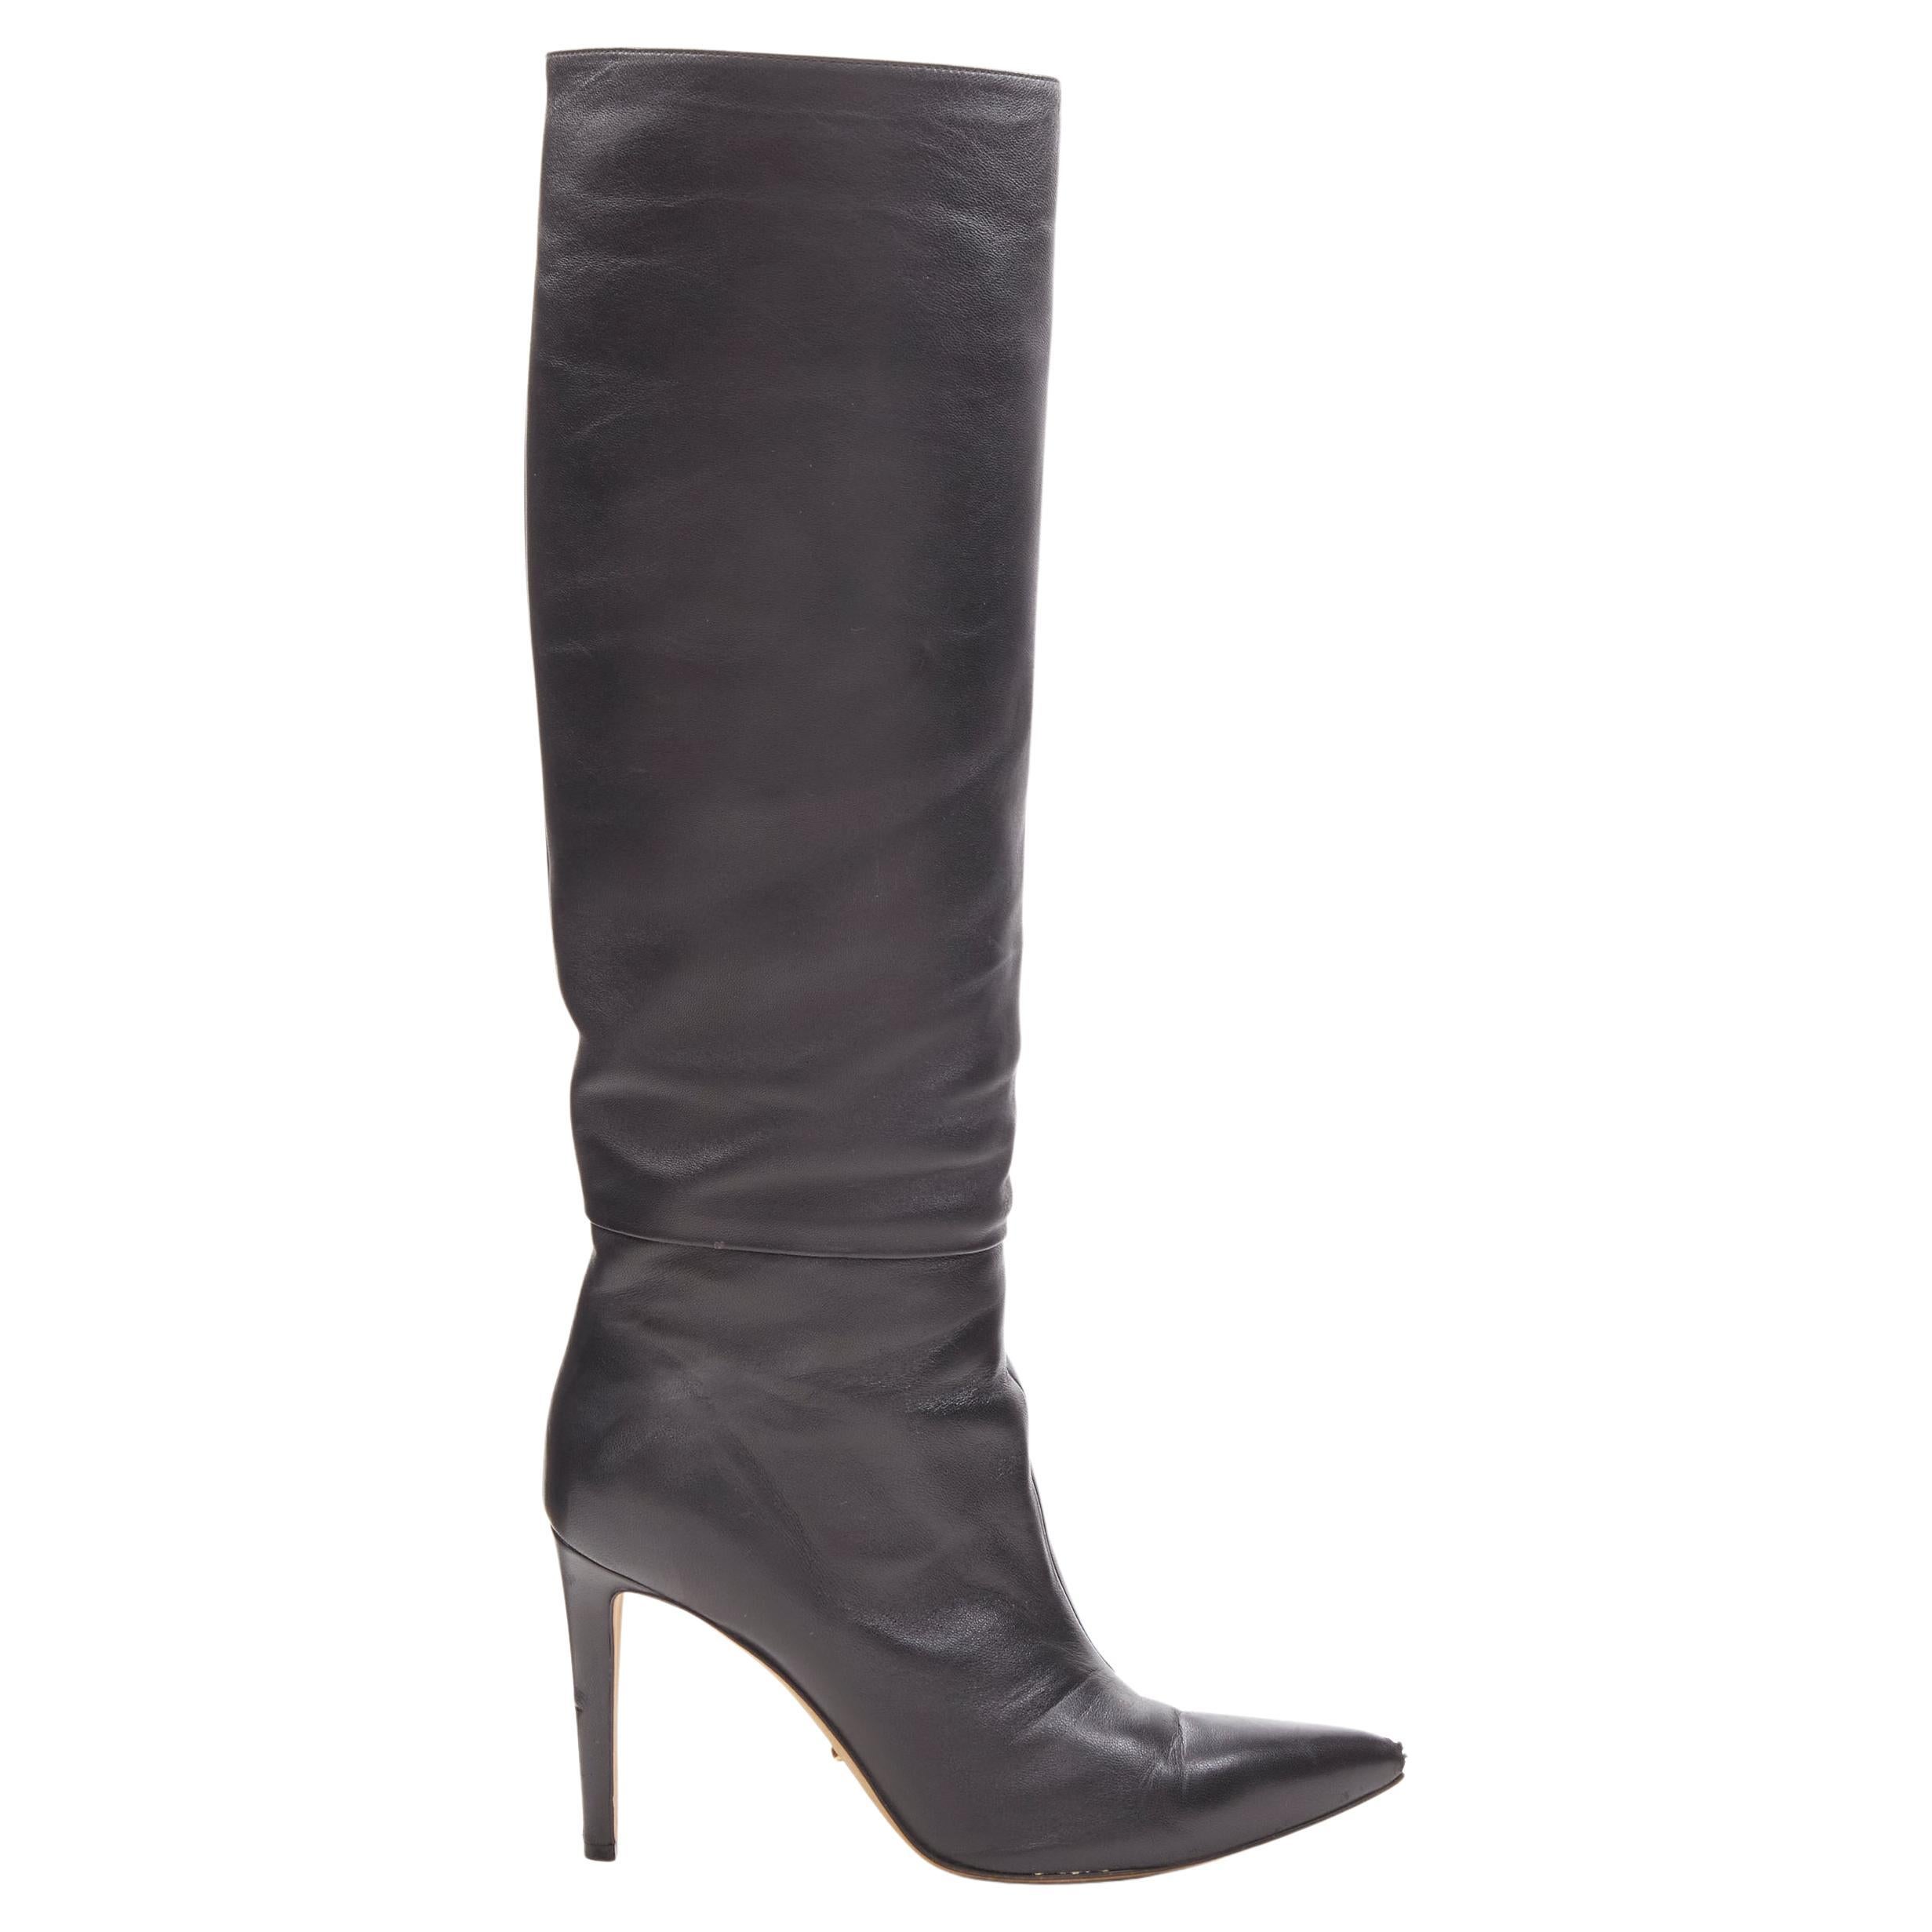 SERGIO ROSSI black leather point toe pull on high heel boots EU38 For Sale